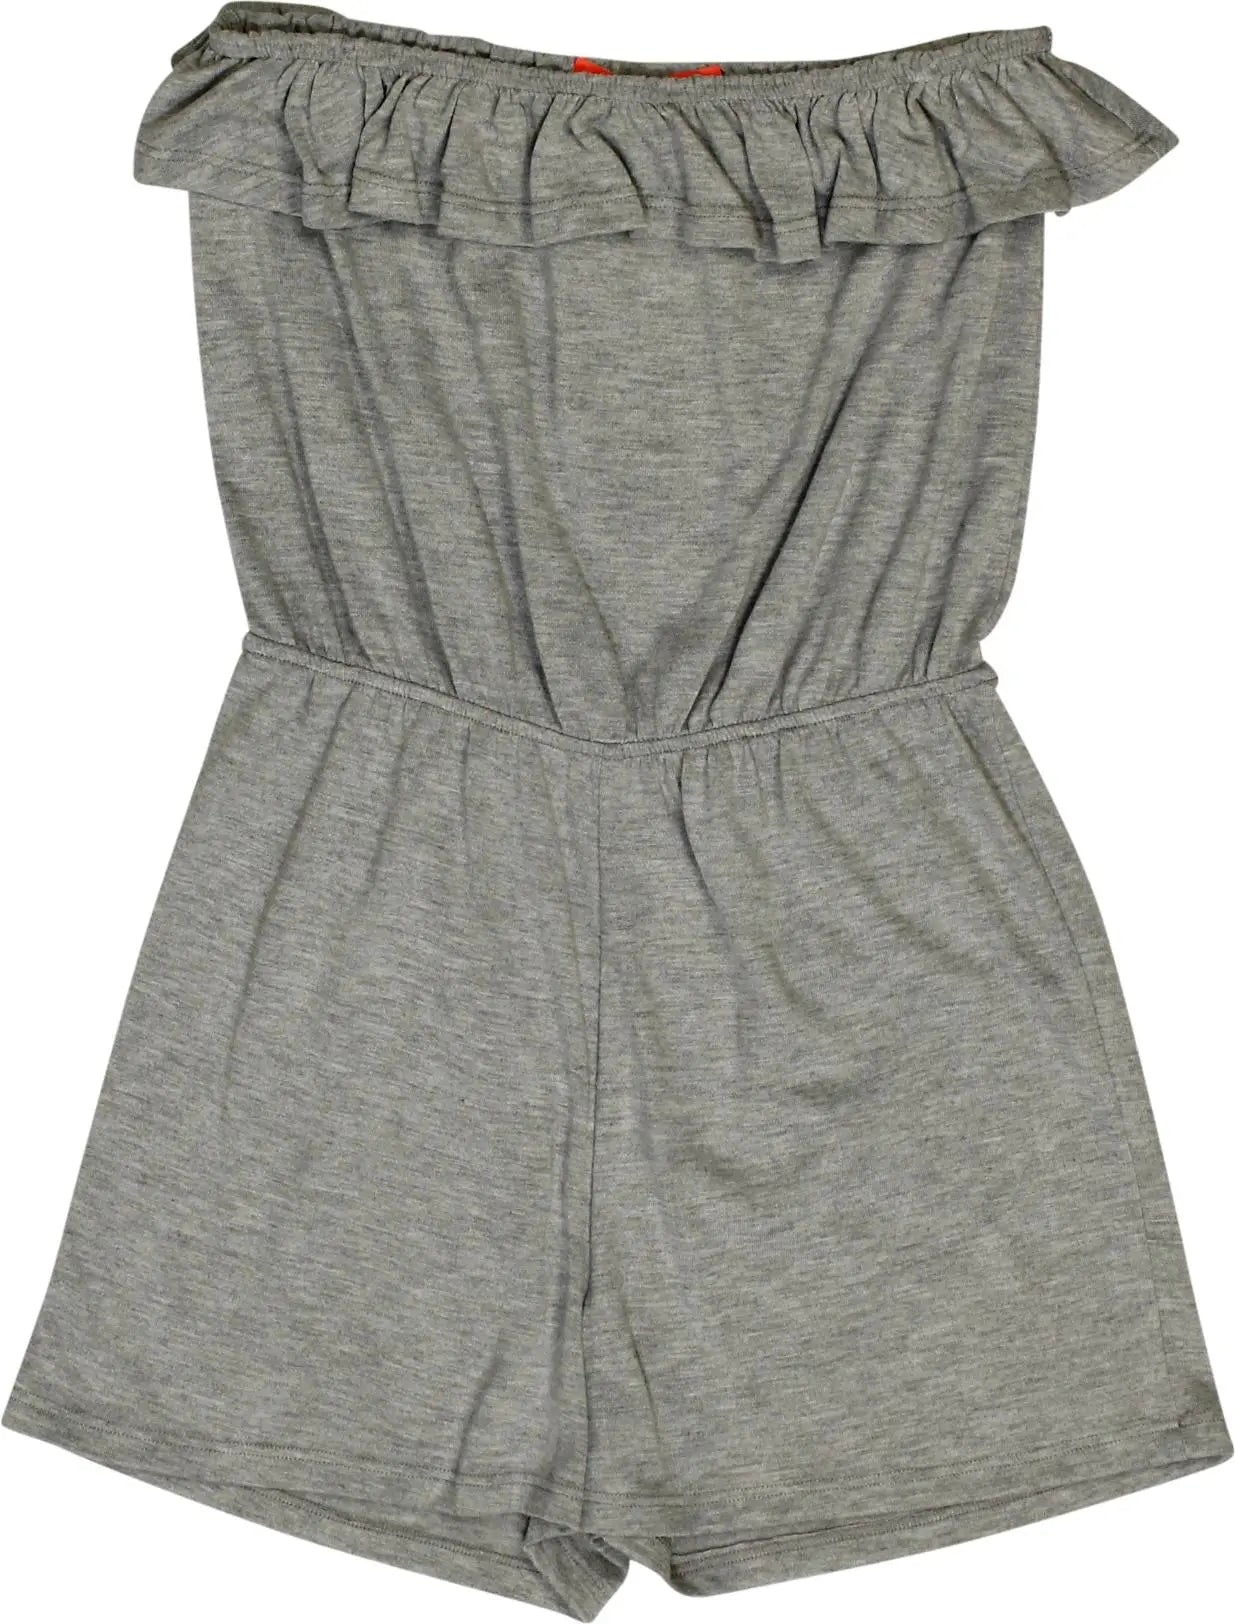 Teen Girls - Grey Strappless Playsuit- ThriftTale.com - Vintage and second handclothing